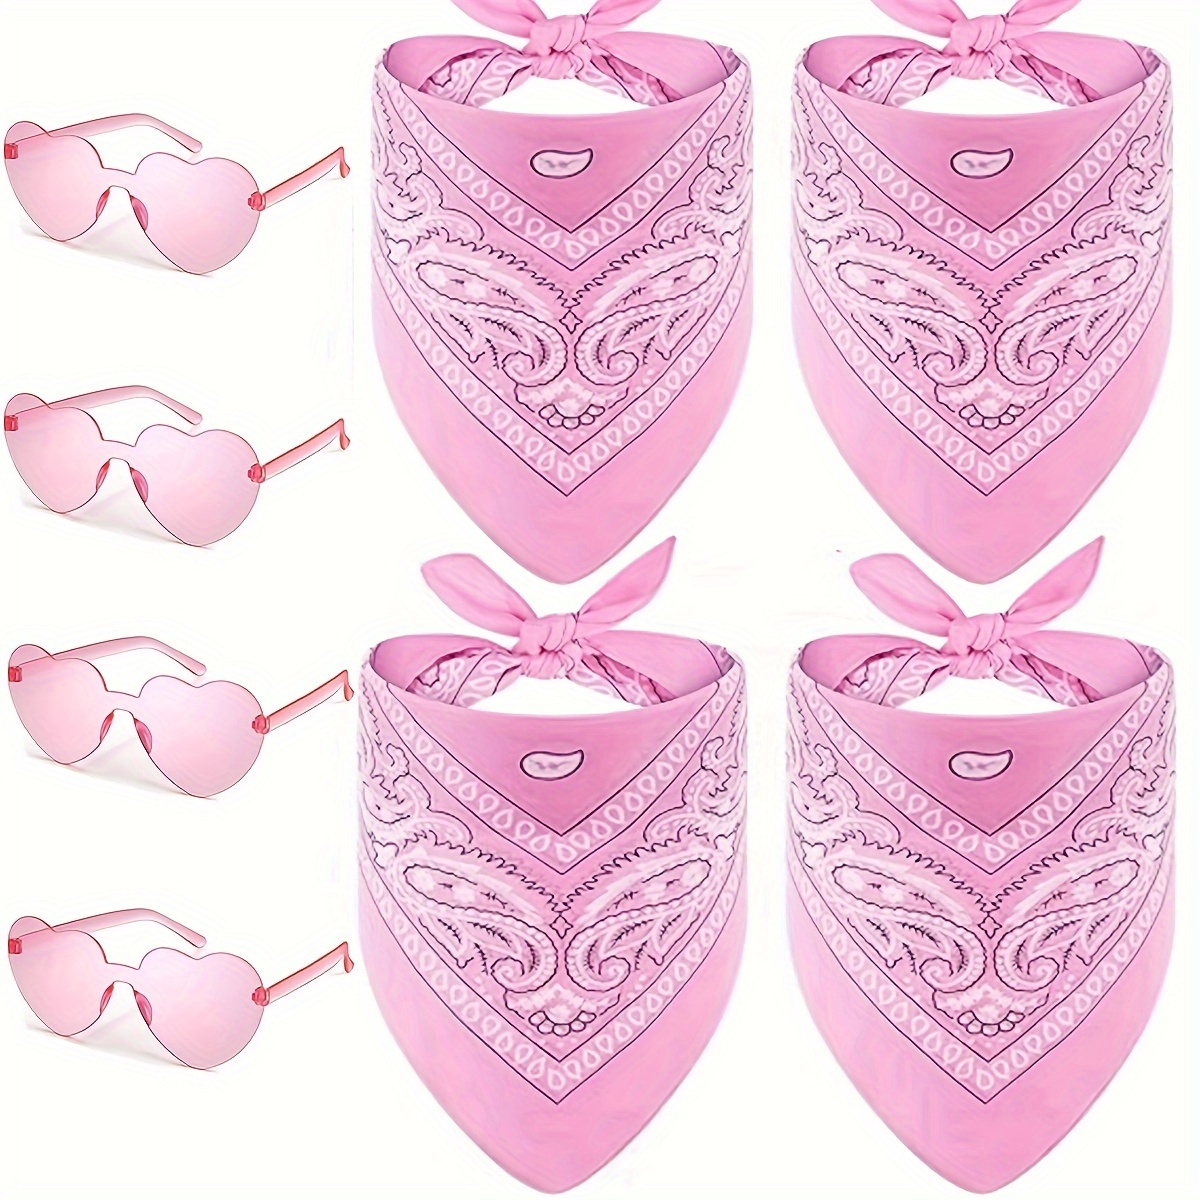 

8pcs, Cowgirl Party Favors, Paisley Bandanas And Heart Glasses For Western Themed Birthday Wedding Bachelorette Baby Shower Christmas Party Supplies